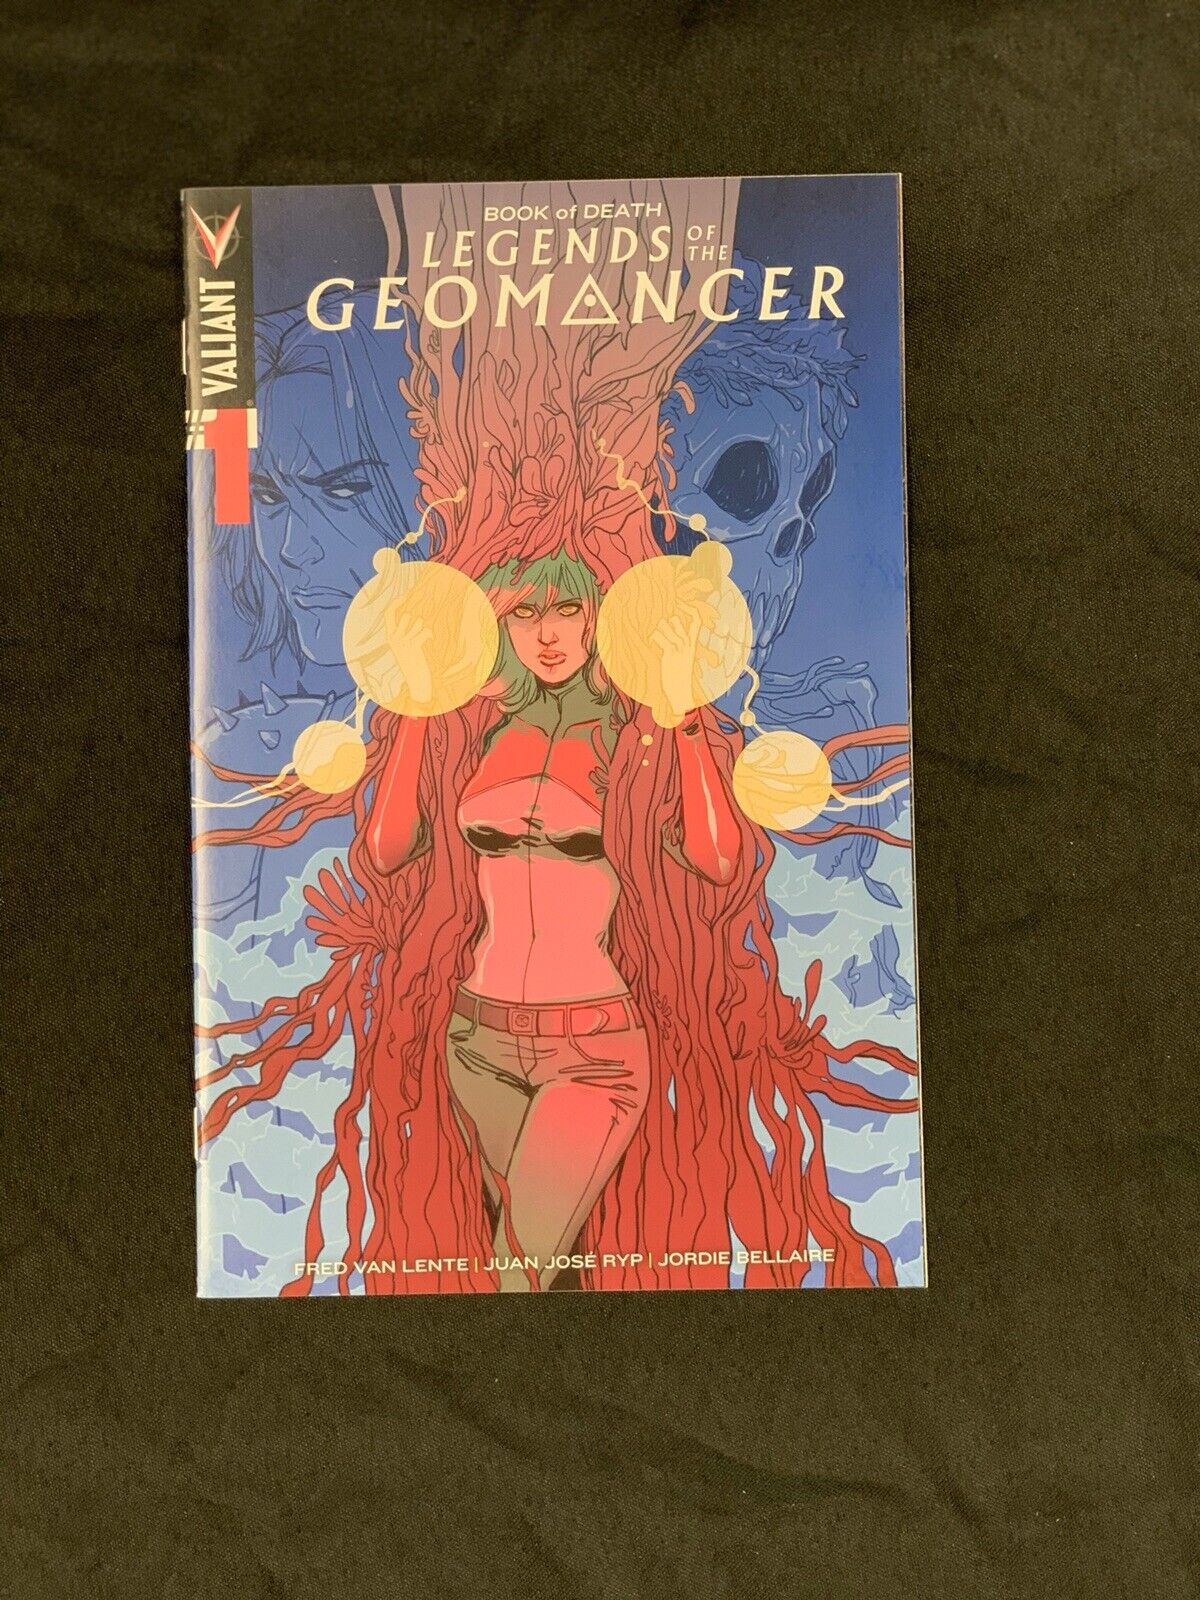 Book of Death Legends of the Geomancer #1 1:25 Variant Valiant HTF RARE